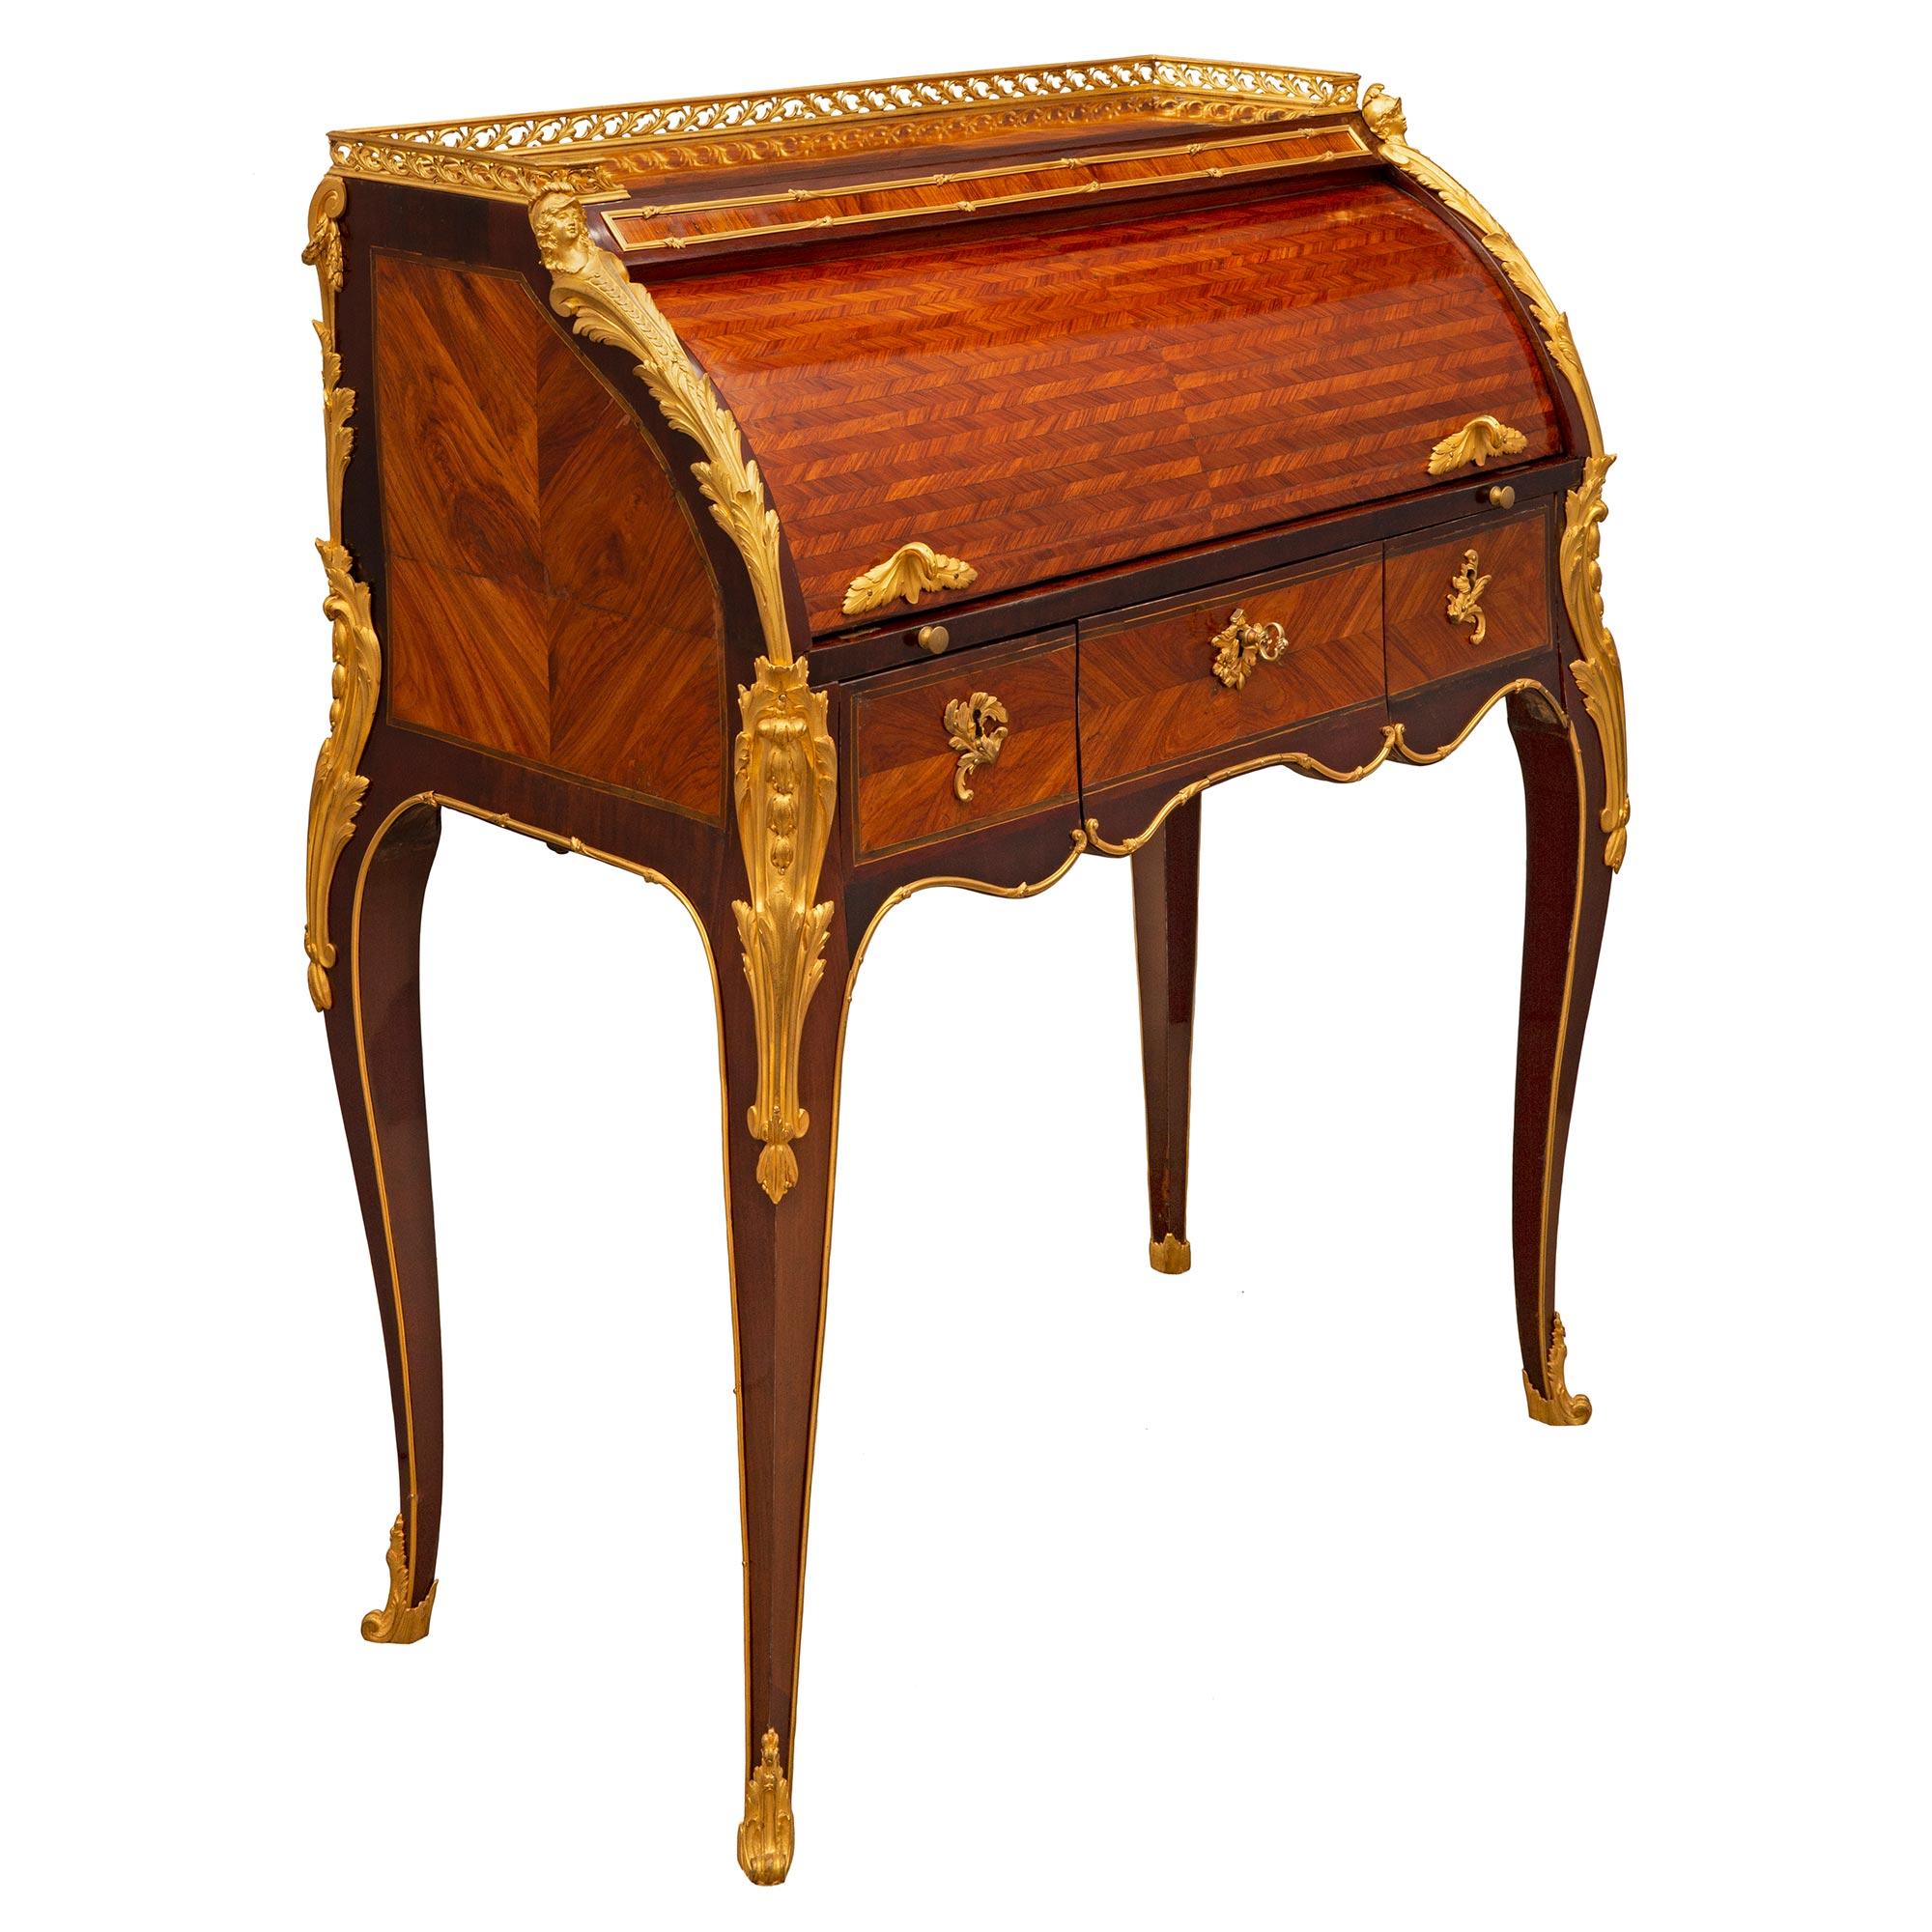 A most elegant and extremely high quality French 18th century Louis XV period Kingwood, Tulipwood, and ormolu desk circa. 1750. The Bureau à Cylindre desk is raised by beautiful cabriole legs with fine fitted scrolled foliate ormolu sabots and